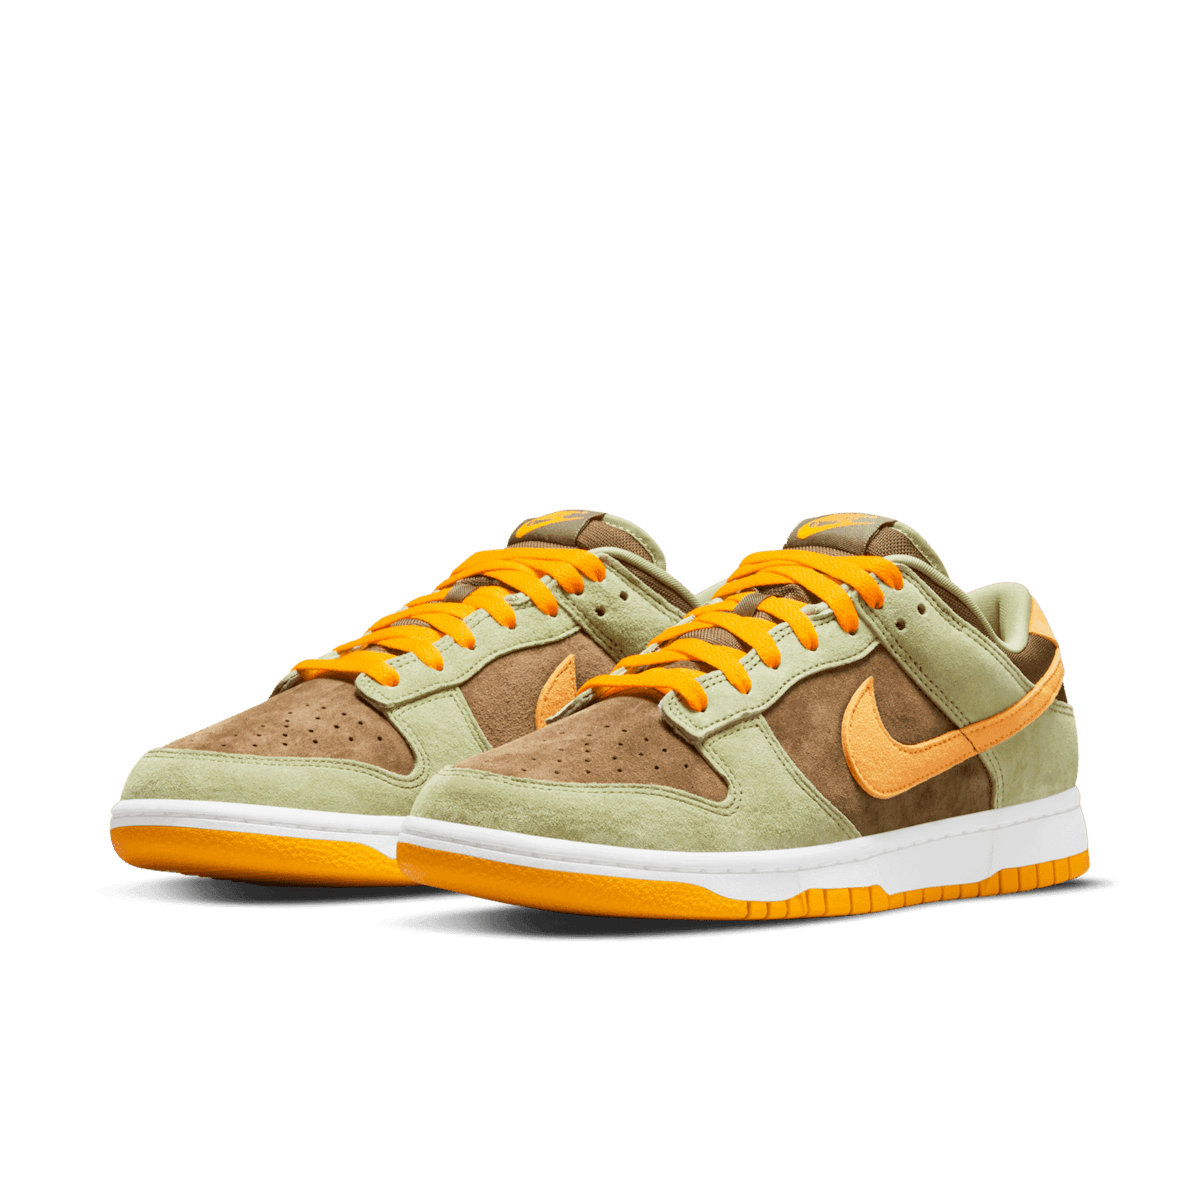 Nike Dunk Raffles - Dusty Olive Low and DH5360-300 Date Release